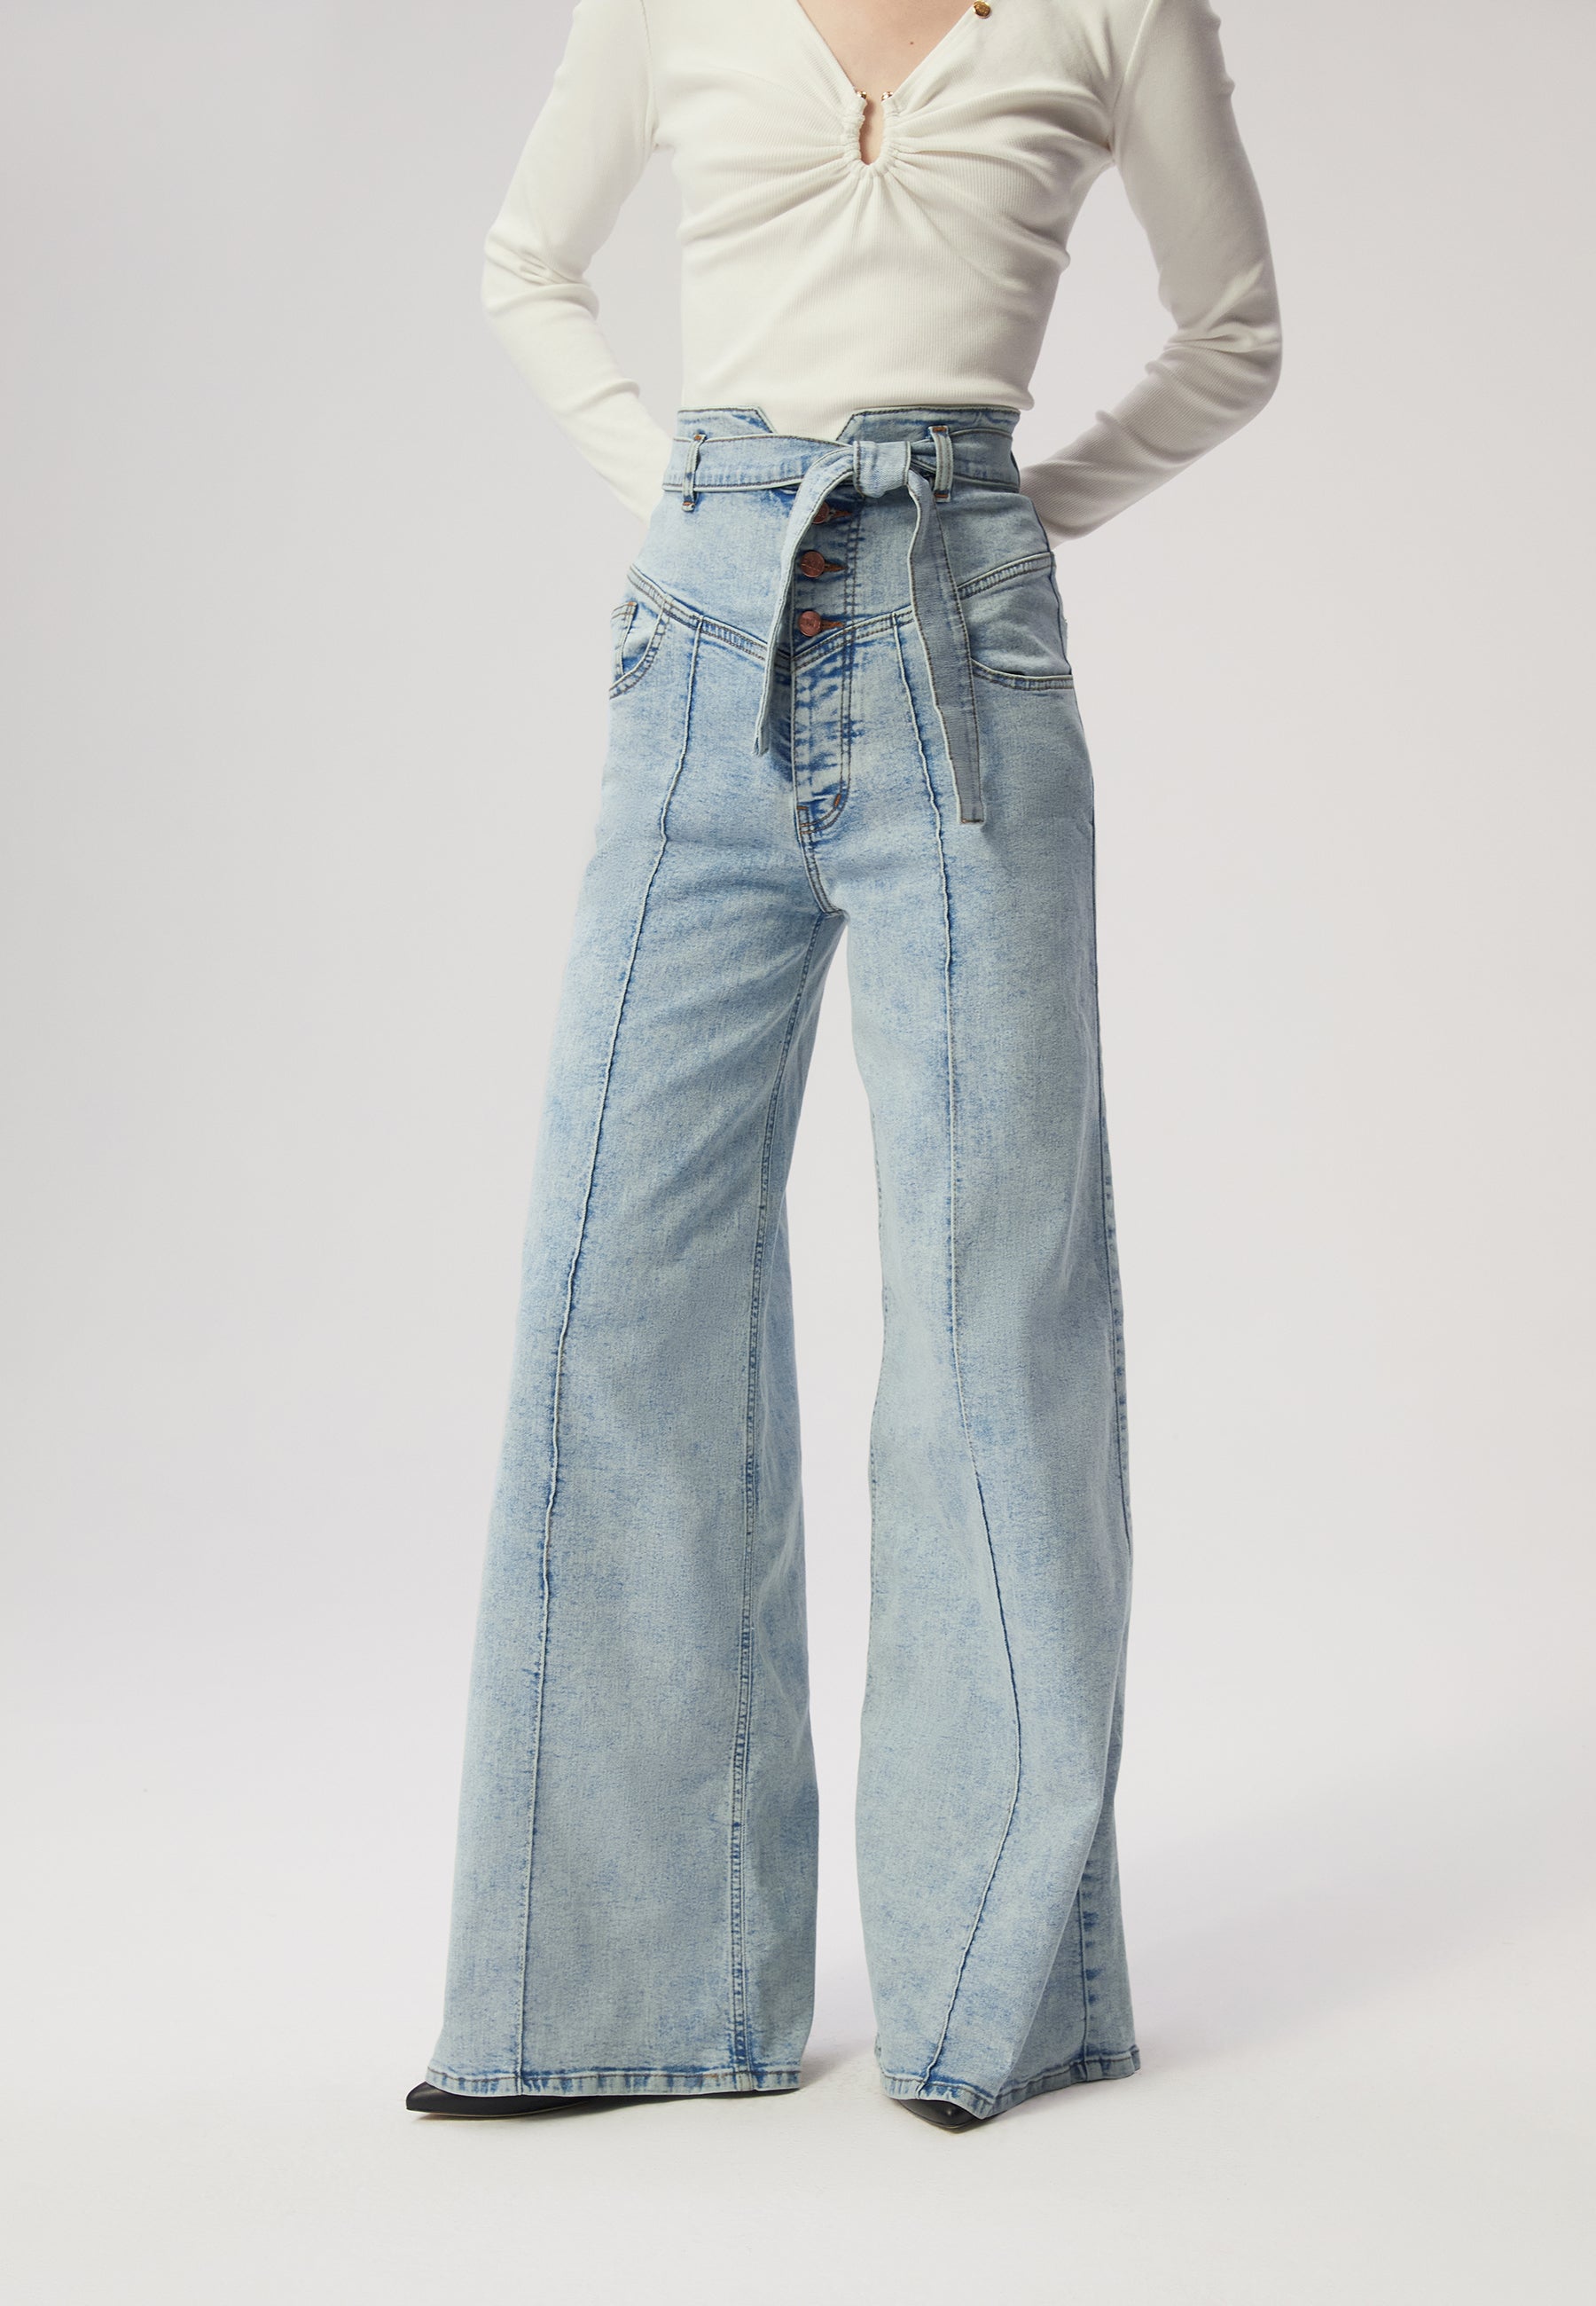 MARLANO jeans with wide legs, blue